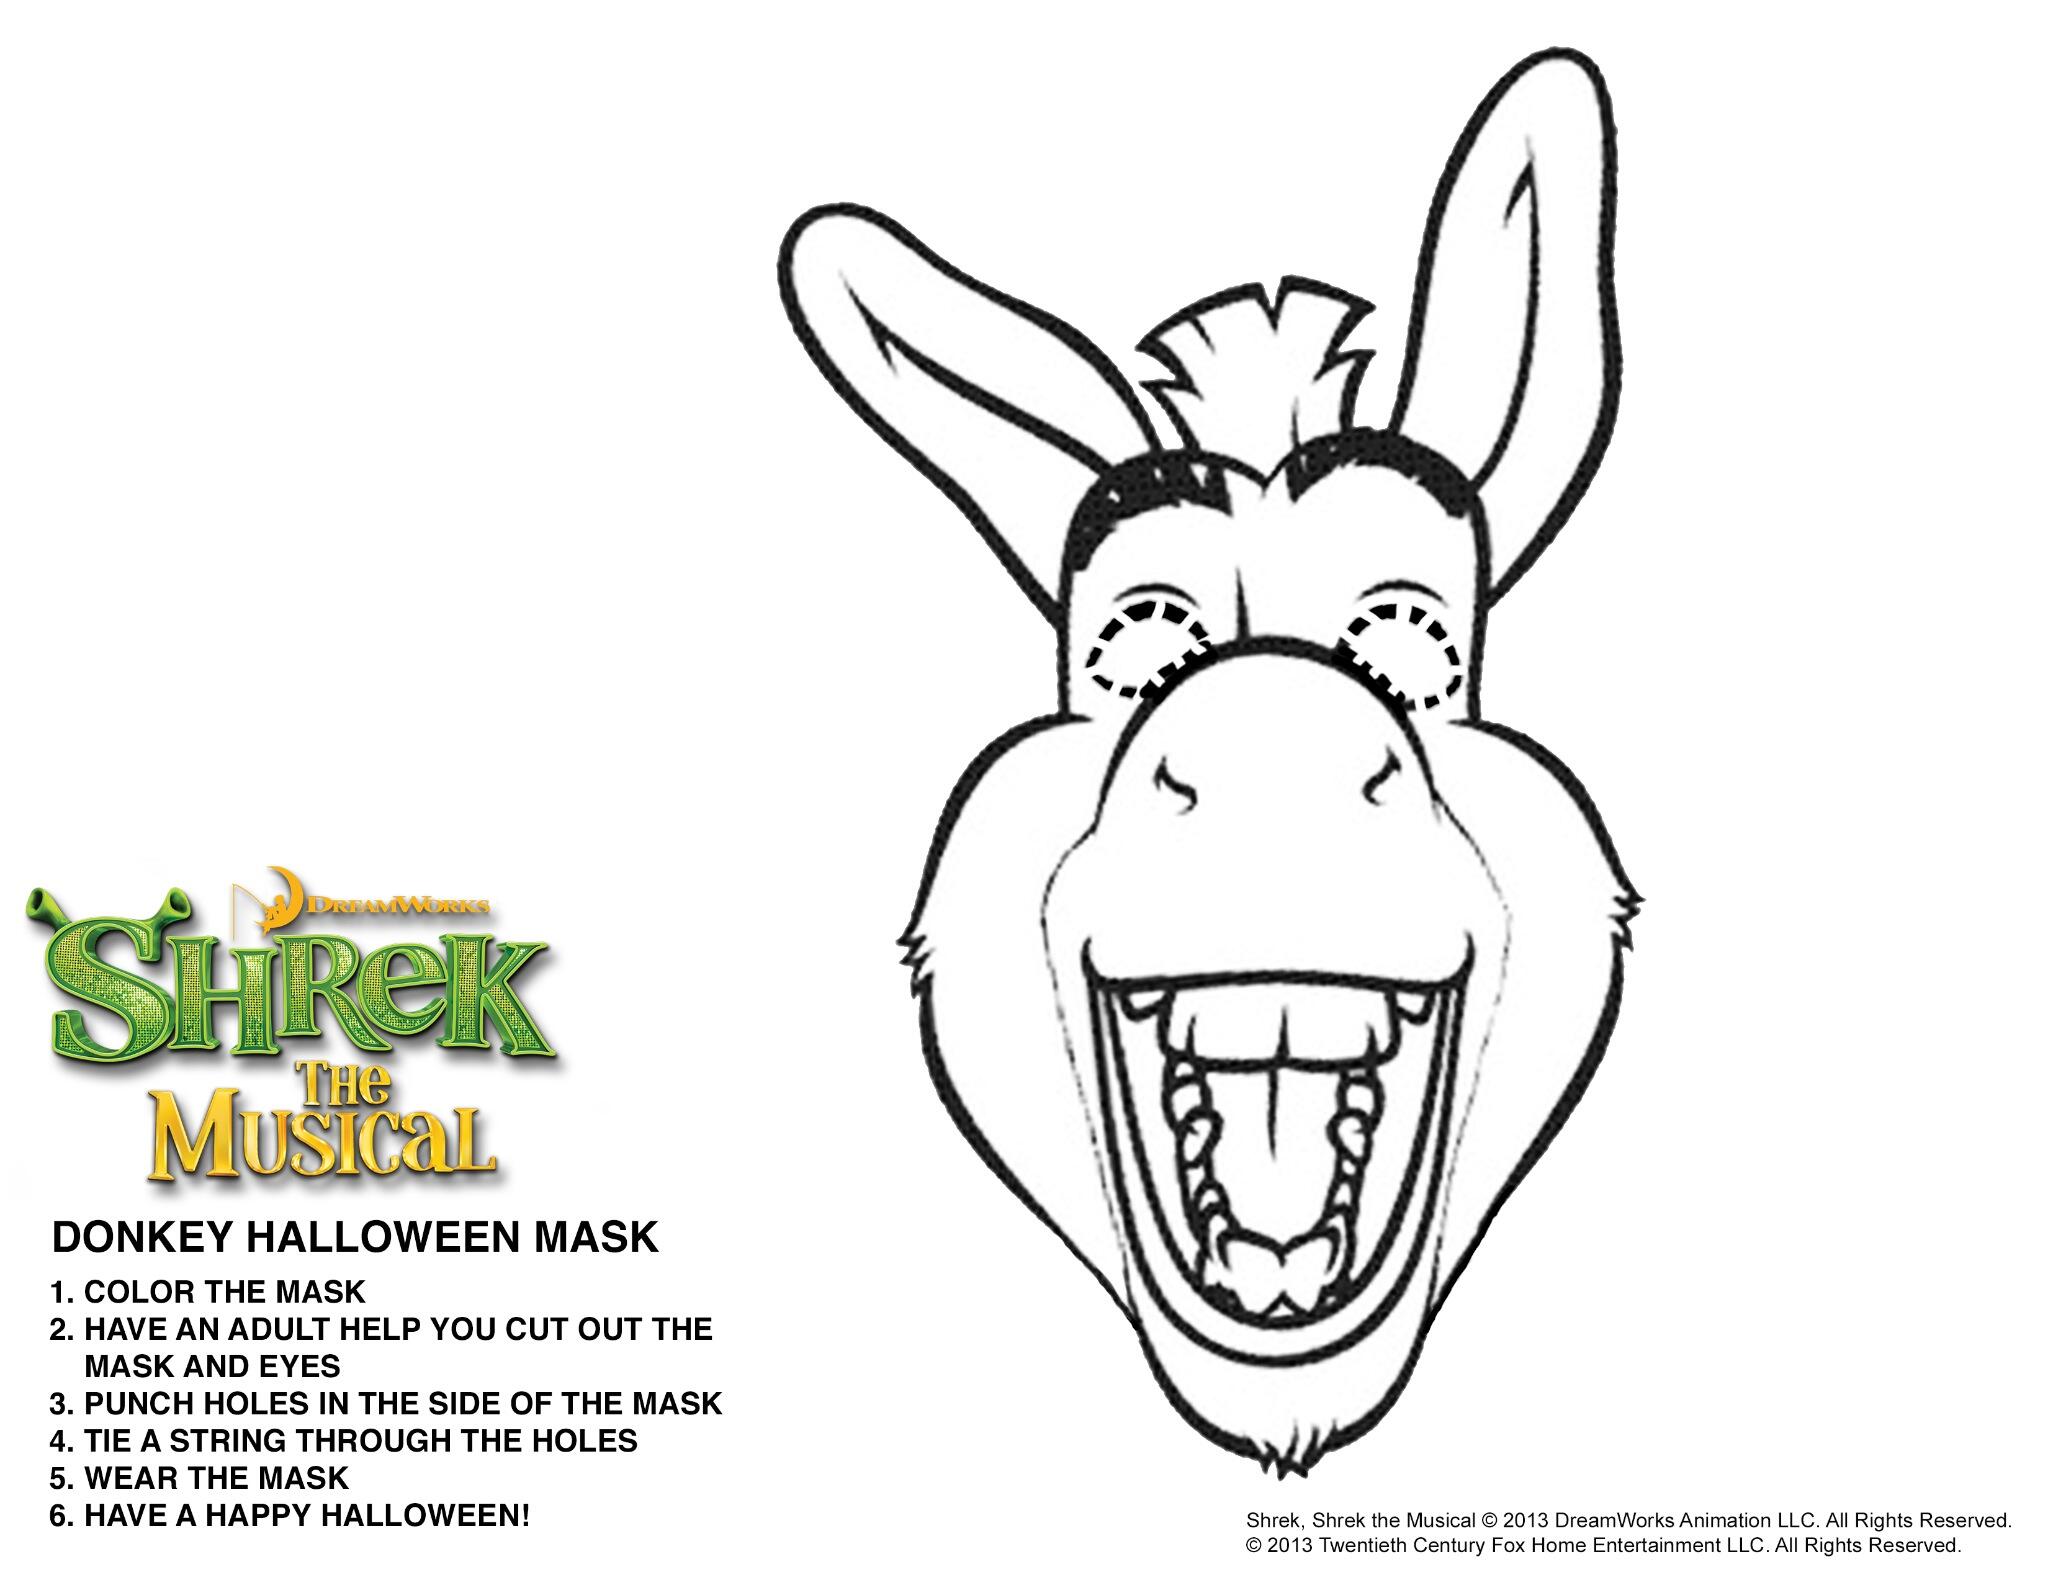 Shrek the musical on x join the halloween fun and download print and color in this donkey mask shrektober trickortreat httptcouqurbtts x